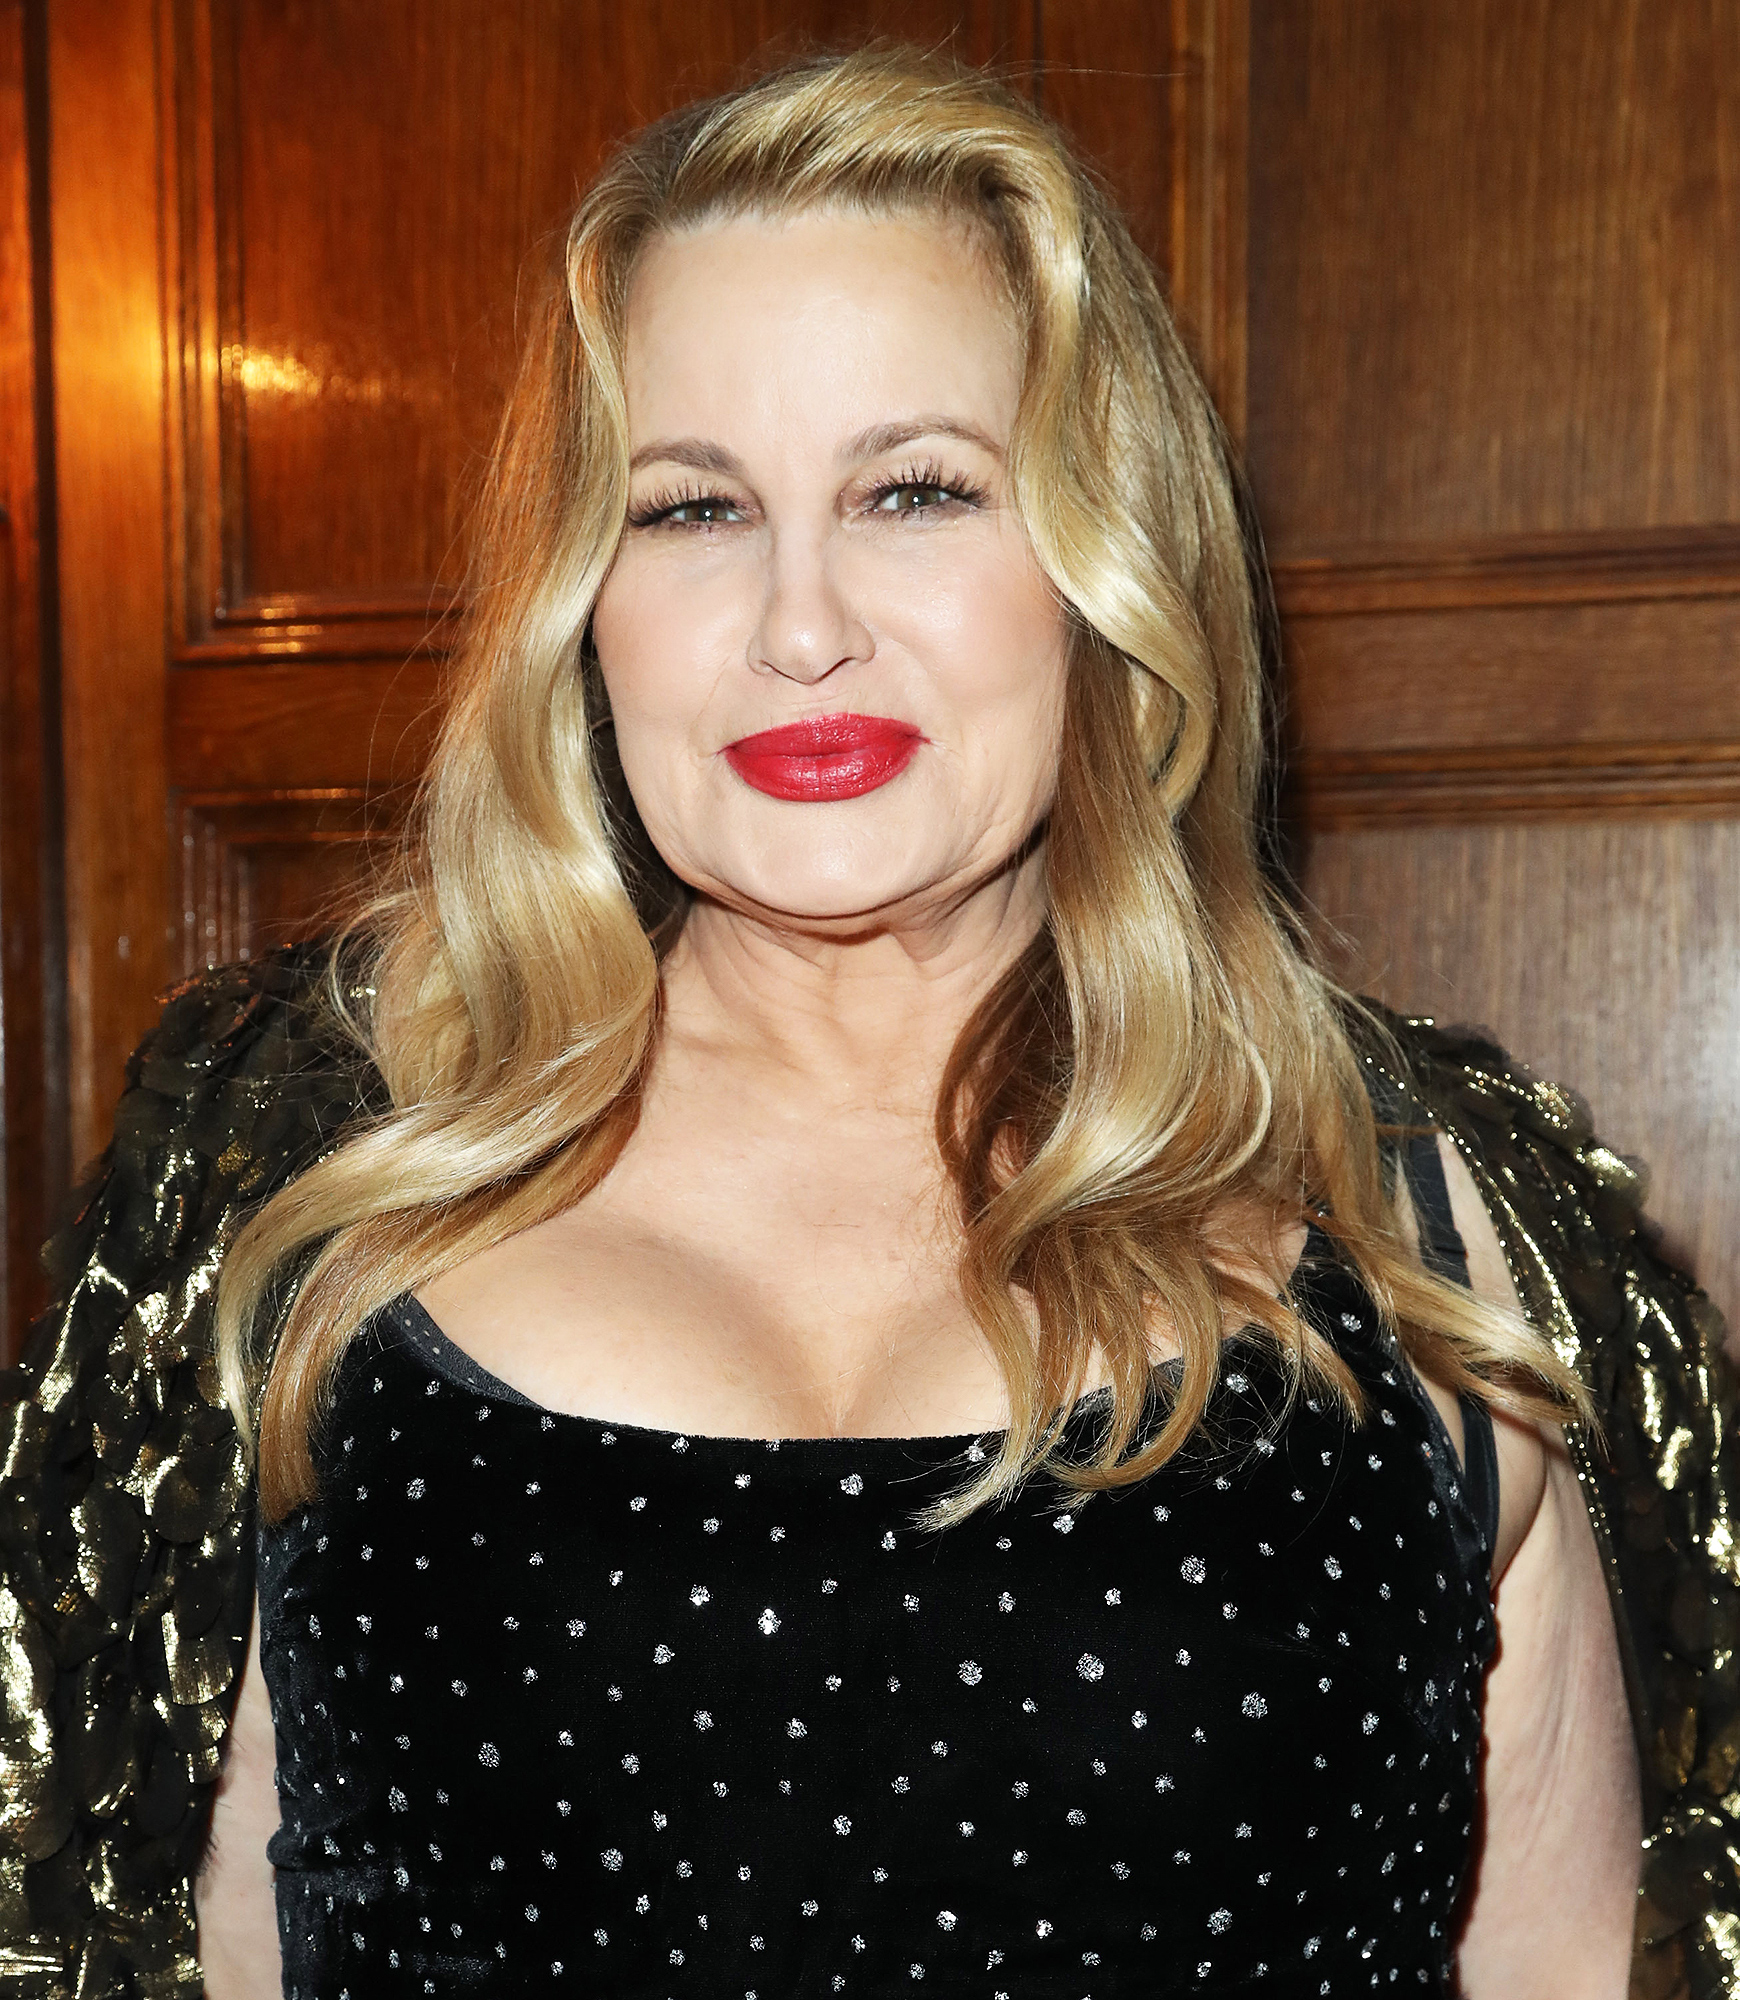 Jennifer Coolidge 25 Things You Dont Know About Me (I Probably Have More Costumes Than Regular Clothes!)